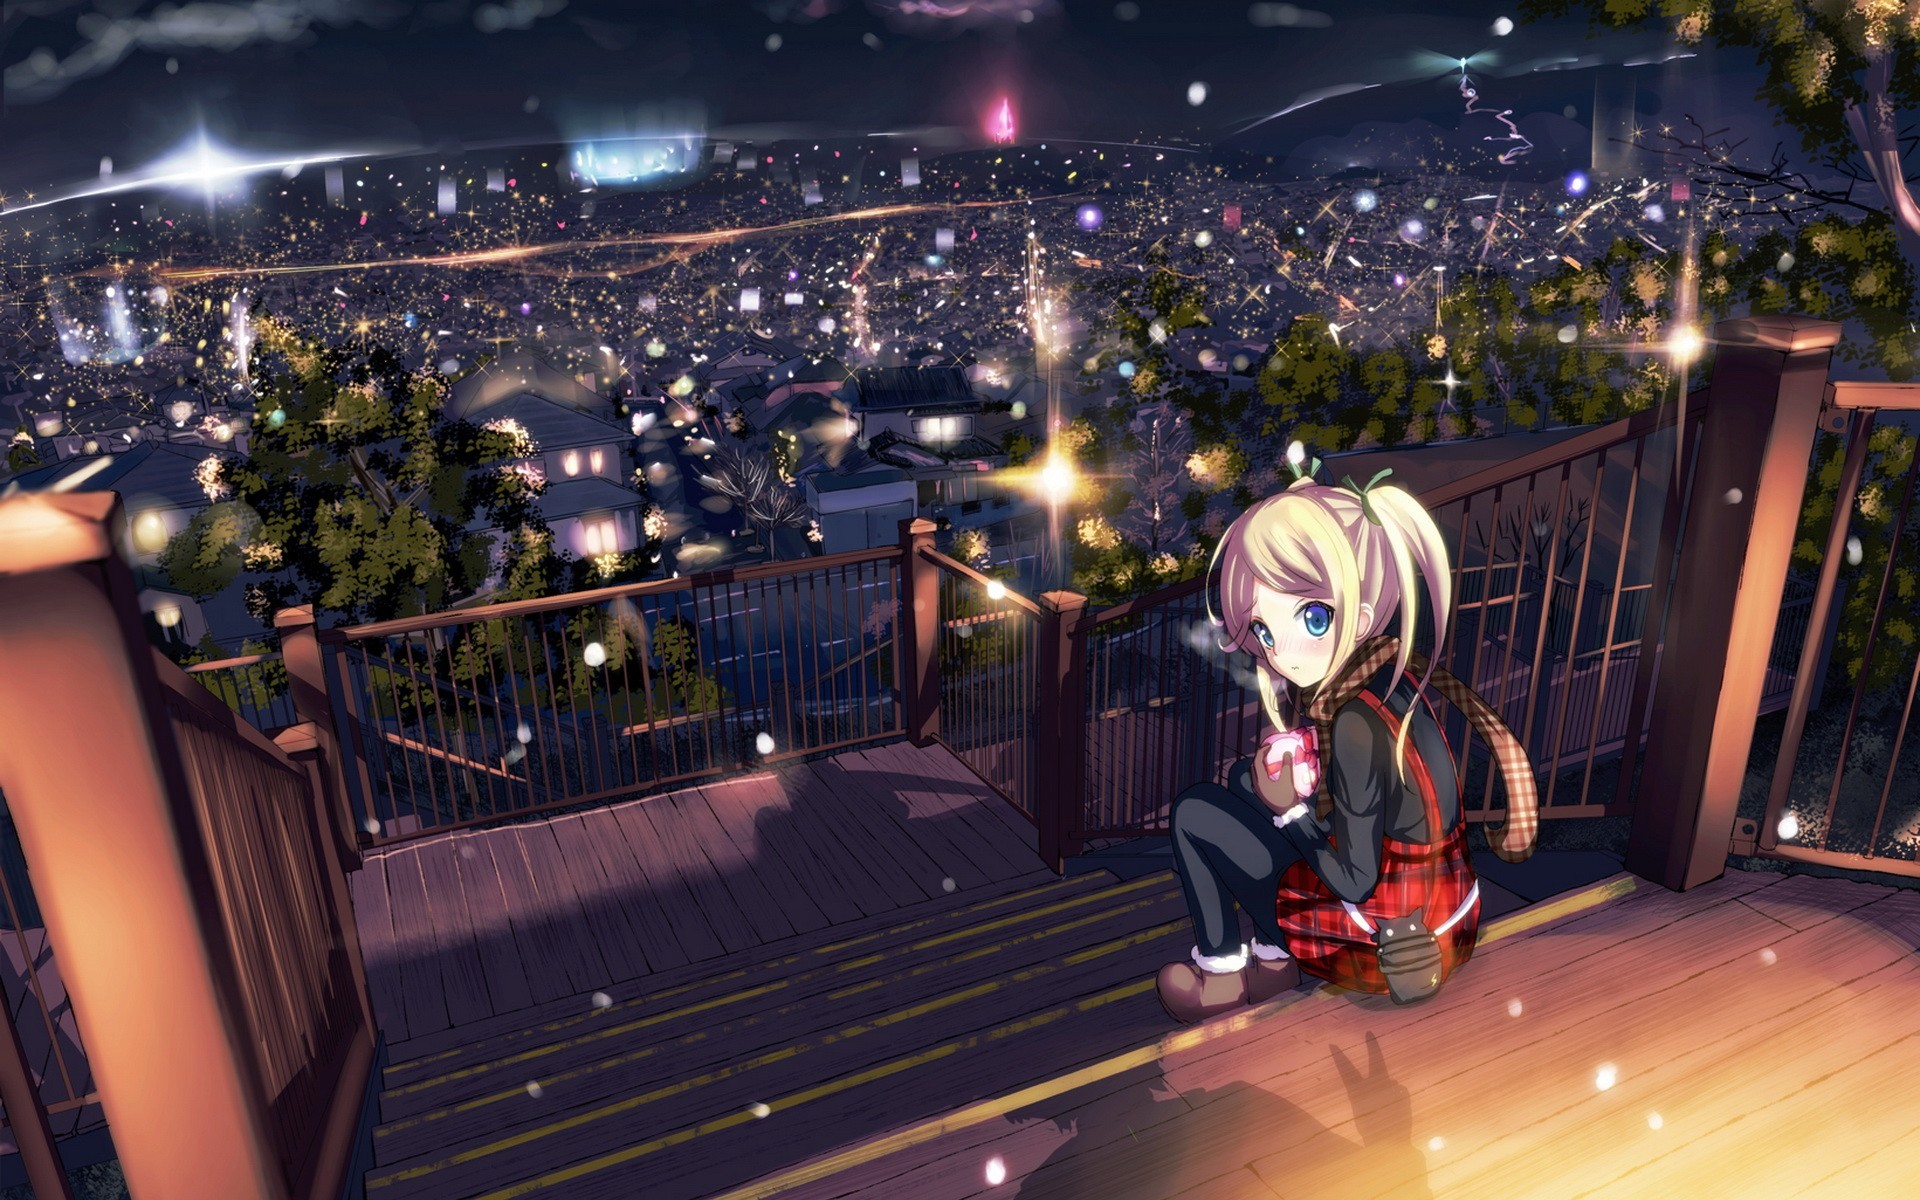 Awesome Anime Scenery Wallpaper 7986